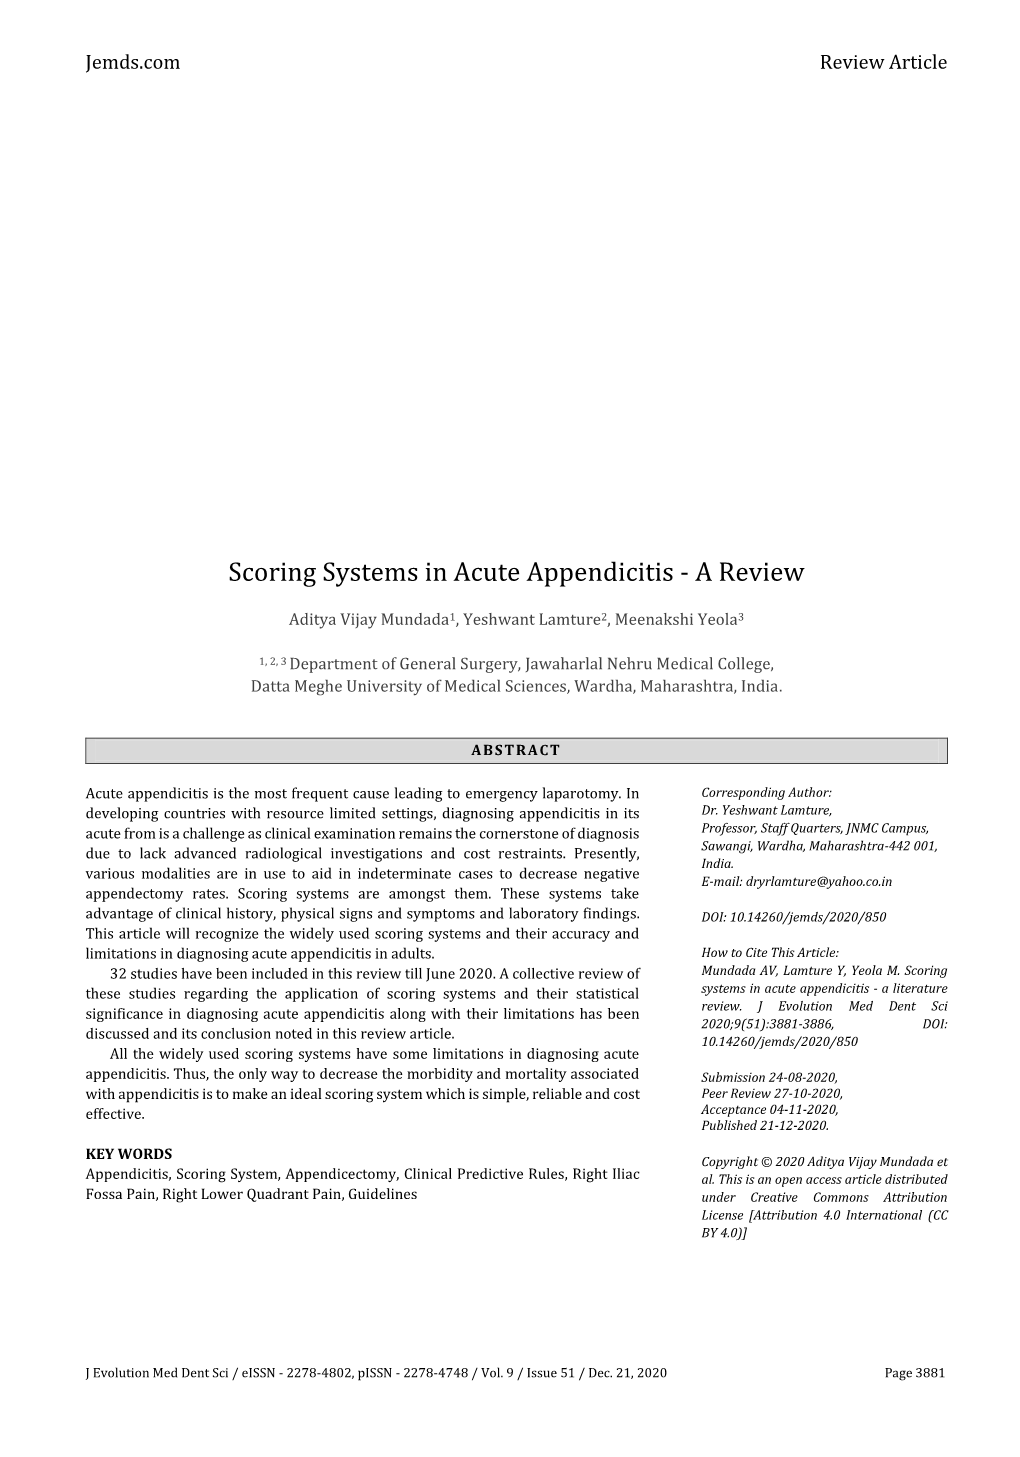 Scoring Systems in Acute Appendicitis - a Review